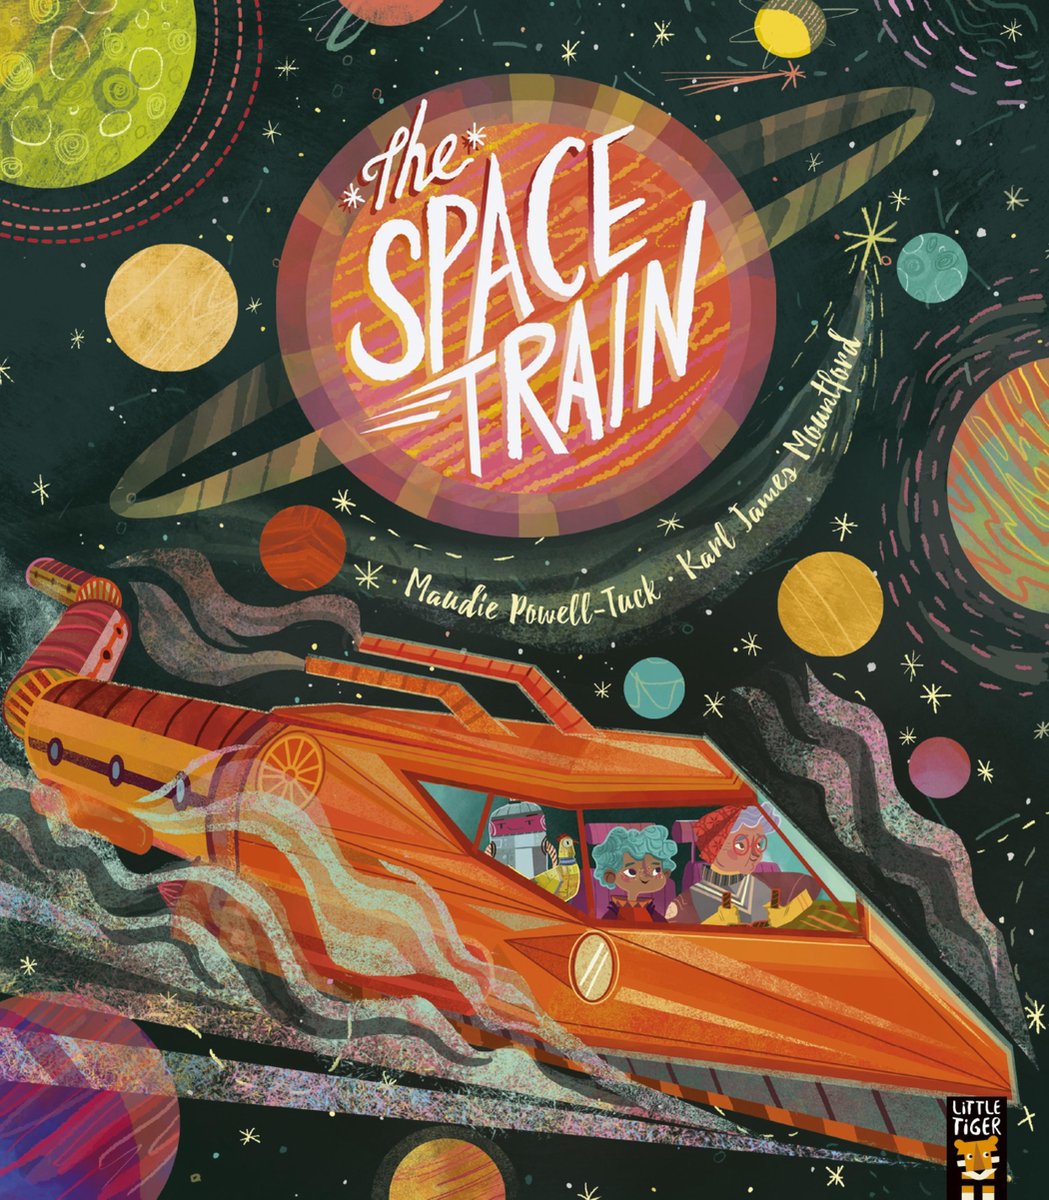 The Space Train - Maudie Powell-Tuck